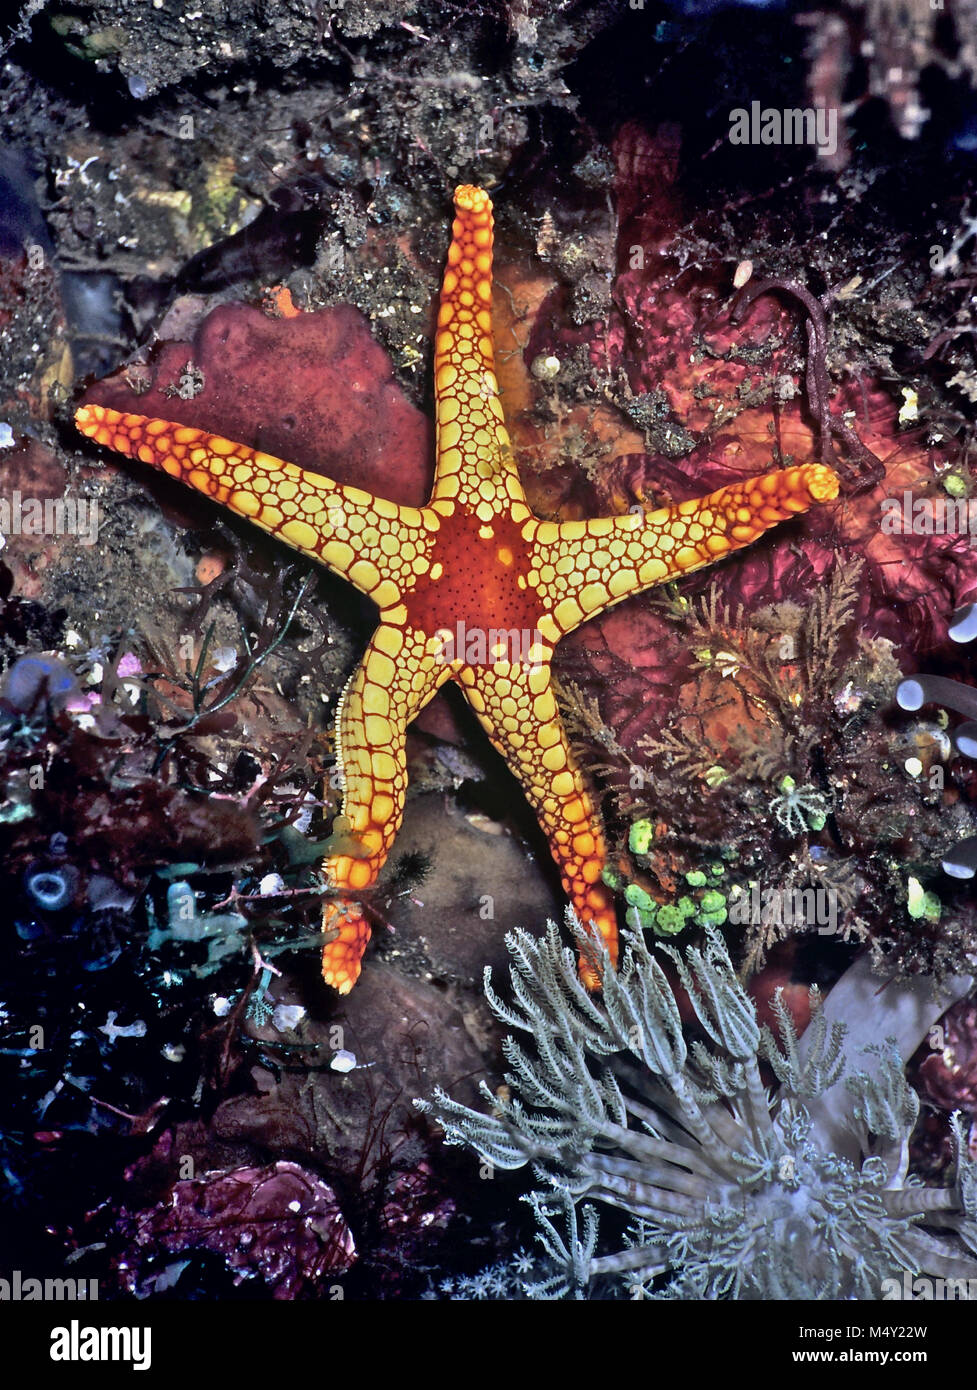 A pearl sea star (Fromia monilis: 20 cms.), showing its characteristic red central area with brightly coloured plates on the five arms. Sea stars have the ability to grow a new arm if one has been eaten by a predator. It is possible, in consequence, to encounter individuals which are in the process of regeneration and have four rather than five arms. The animal lives in rocky areas, where it feeds on sponges and small invertebrates; its mouth being on the underside of the central plate. It moves about on the substrate using hundreds of hydraulically-controlled tube feet. Egyptian Red Sea. Stock Photo